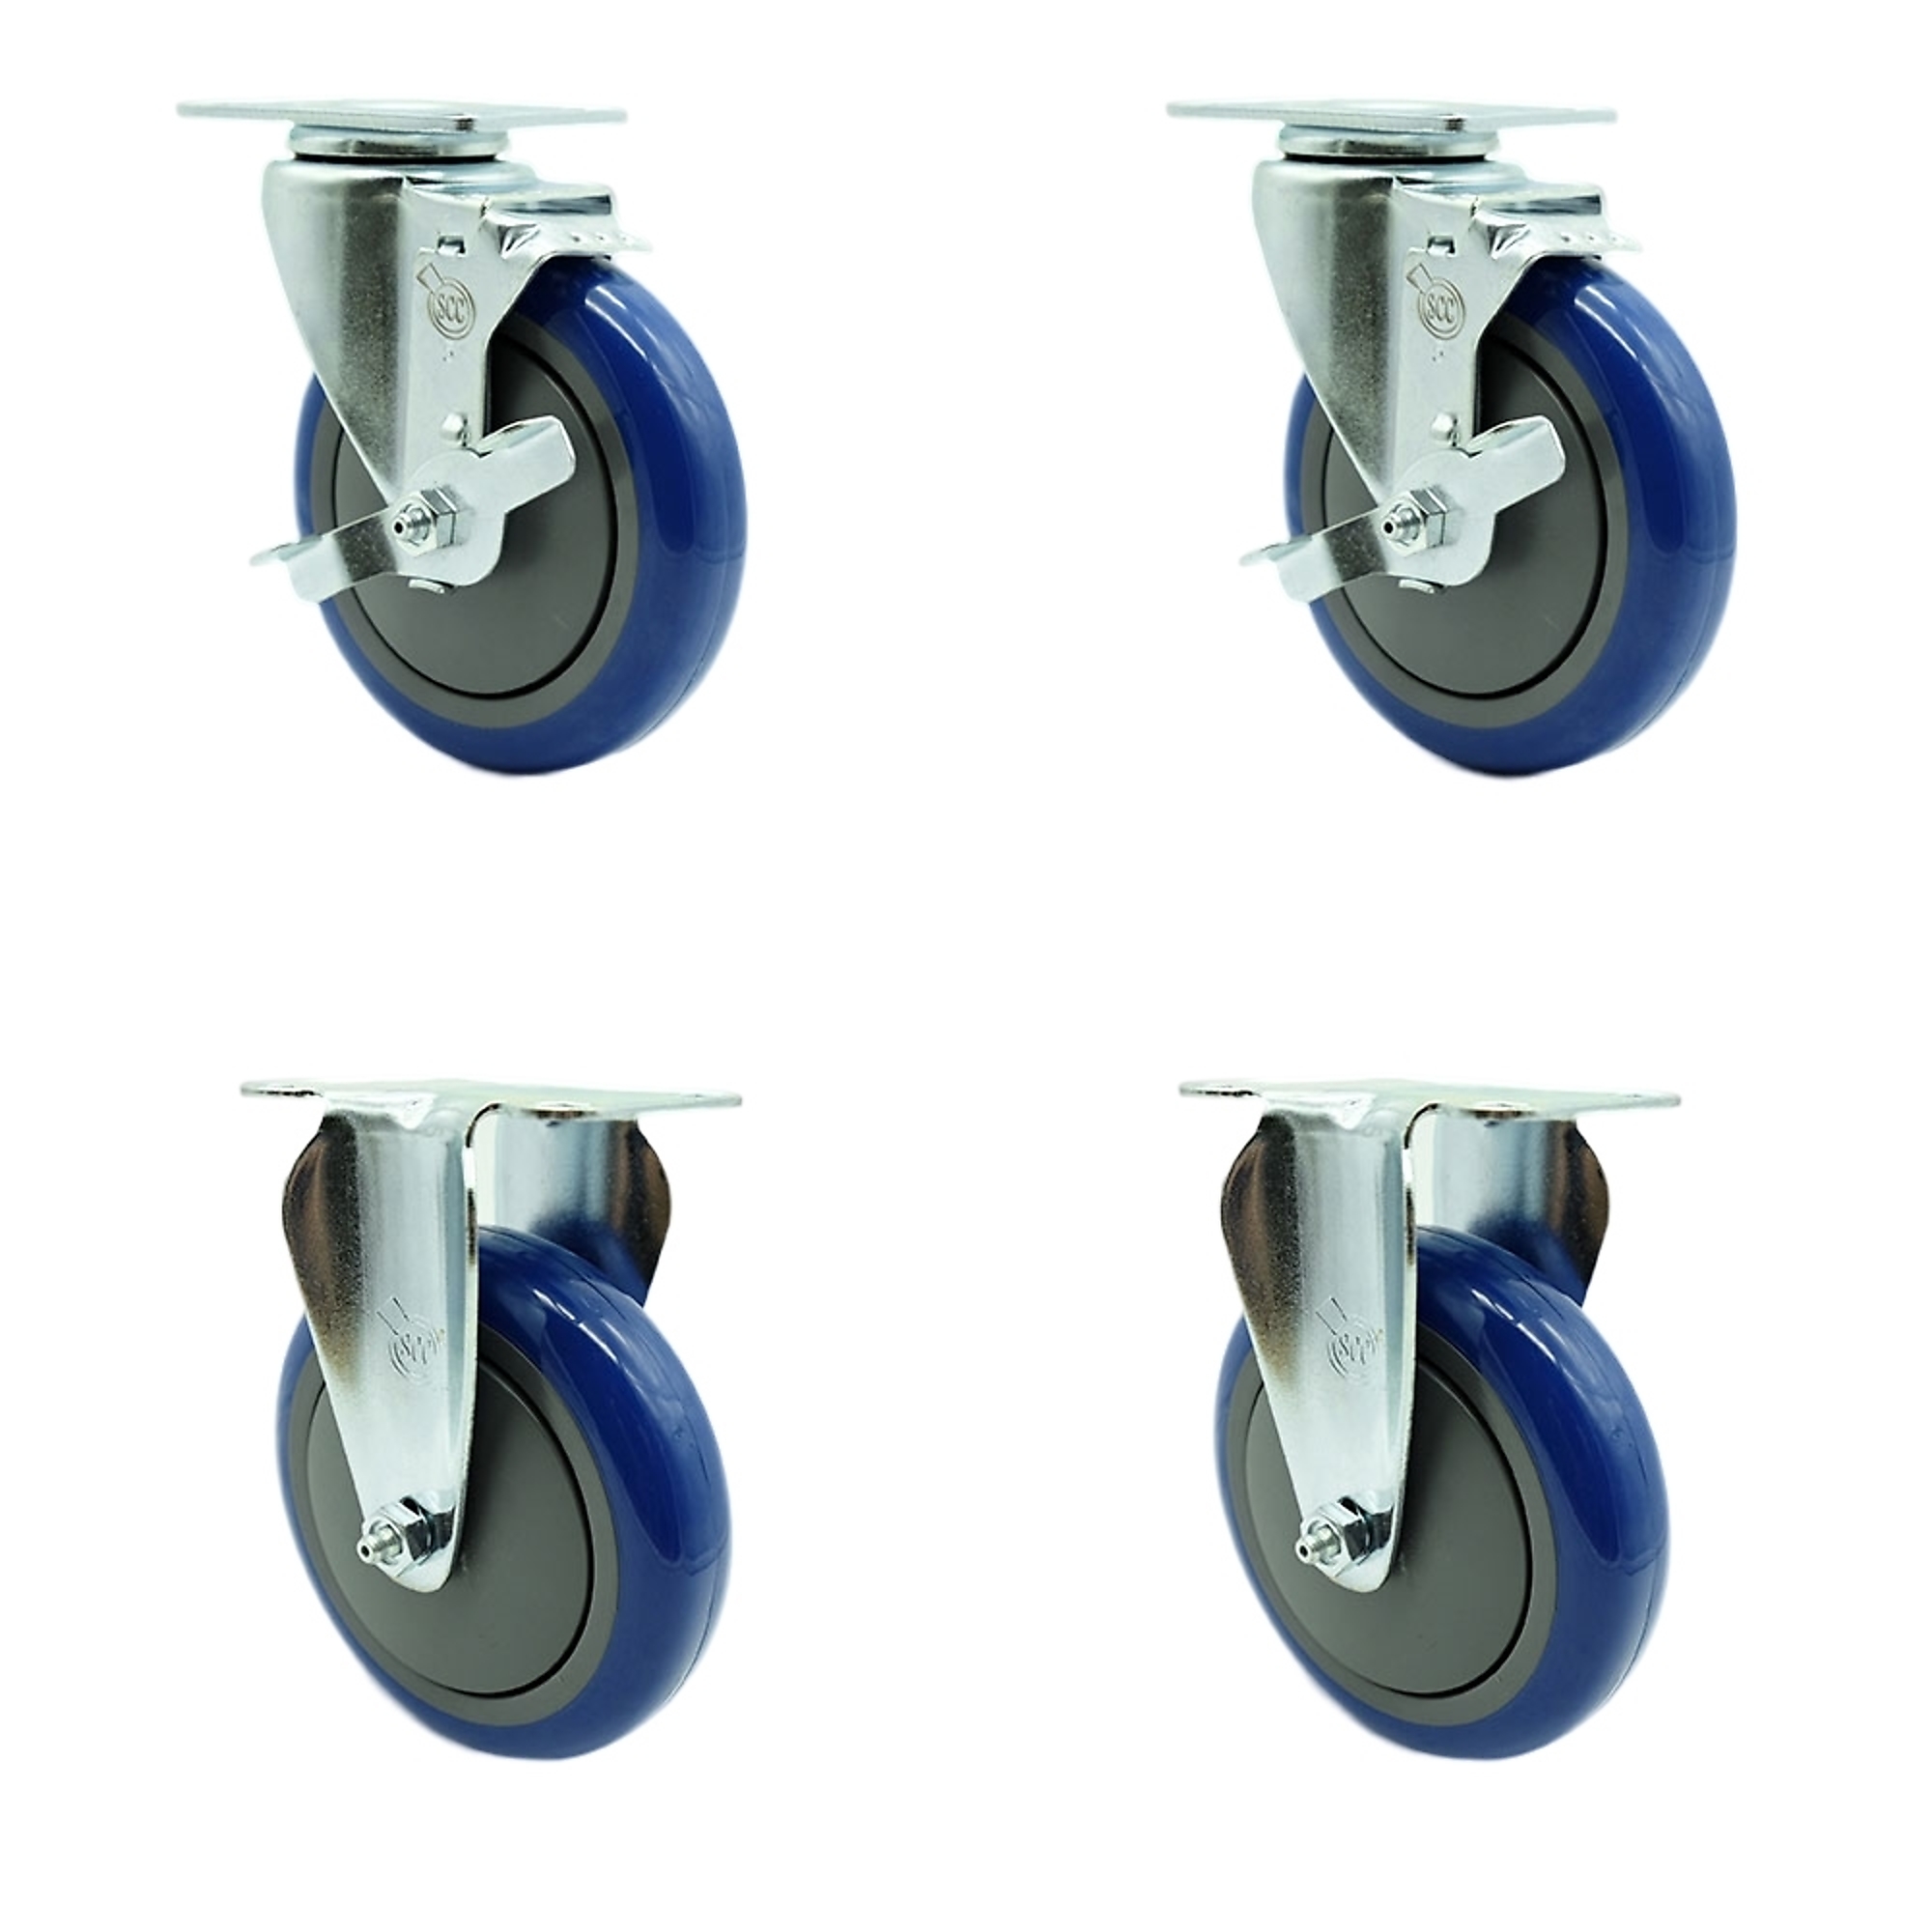 Service Caster, 5Inch x 1 1/4Inch Plate Casters, Wheel Diameter 5 in, Caster Type Swivel, Package (qty.) 4, Model CAM-SCC-20S514-PPUB-BLU-TLB-2-R514-2 -  734005058437